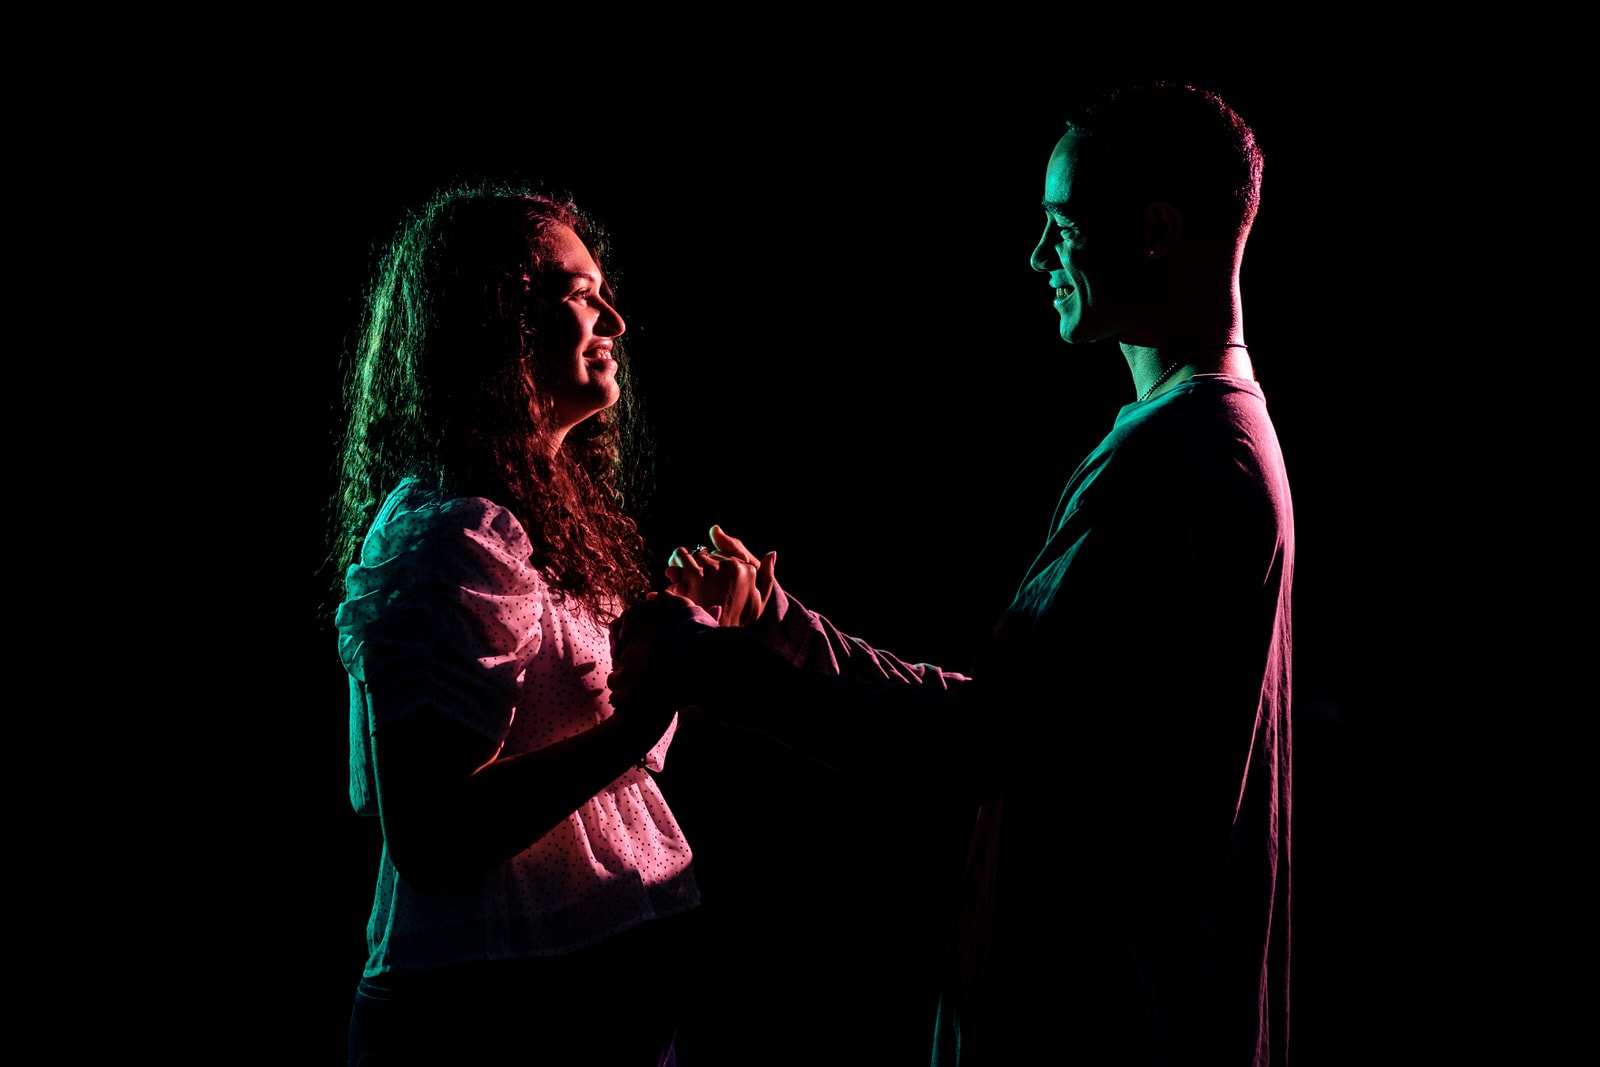 Dramatic after dark engagement photos are Kivus & Camera's specialty!